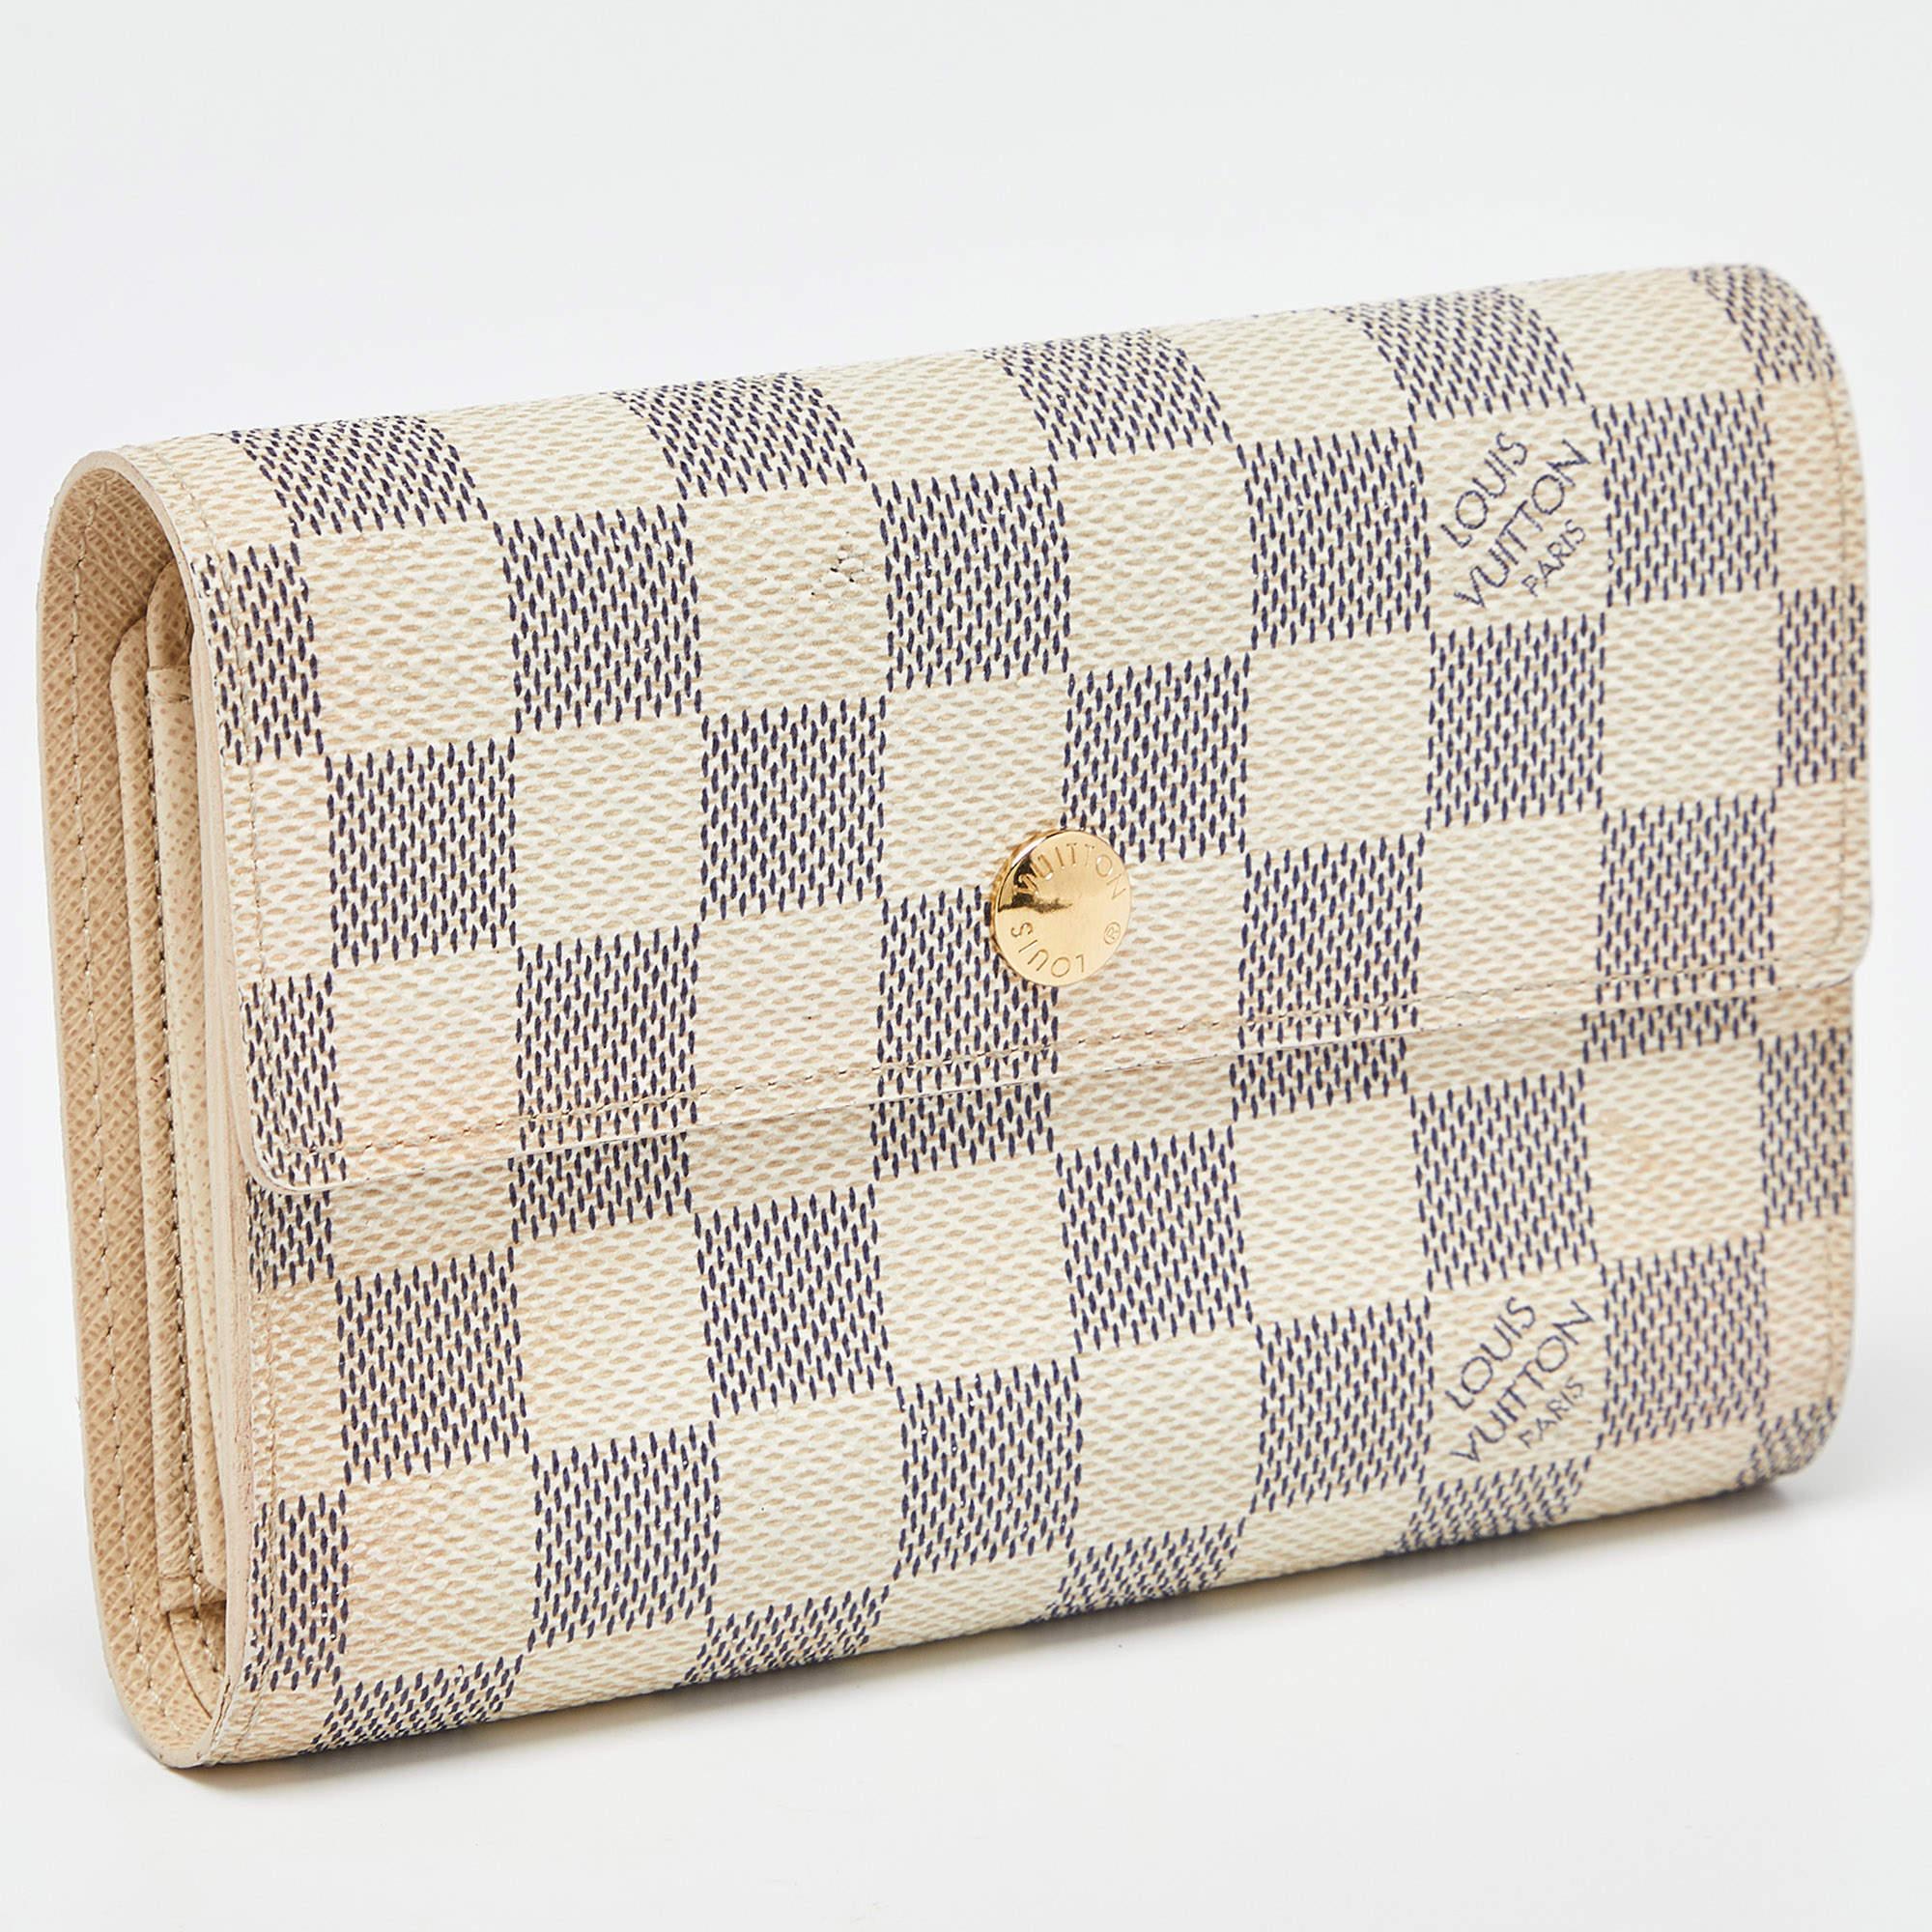 This lovely Alexandra wallet from Louis Vuitton will surely delight your impeccable style. It has been crafted from Damier Azur canvas and designed with a front flap. The leather lined interior comes with multiple card slots, compartments for your